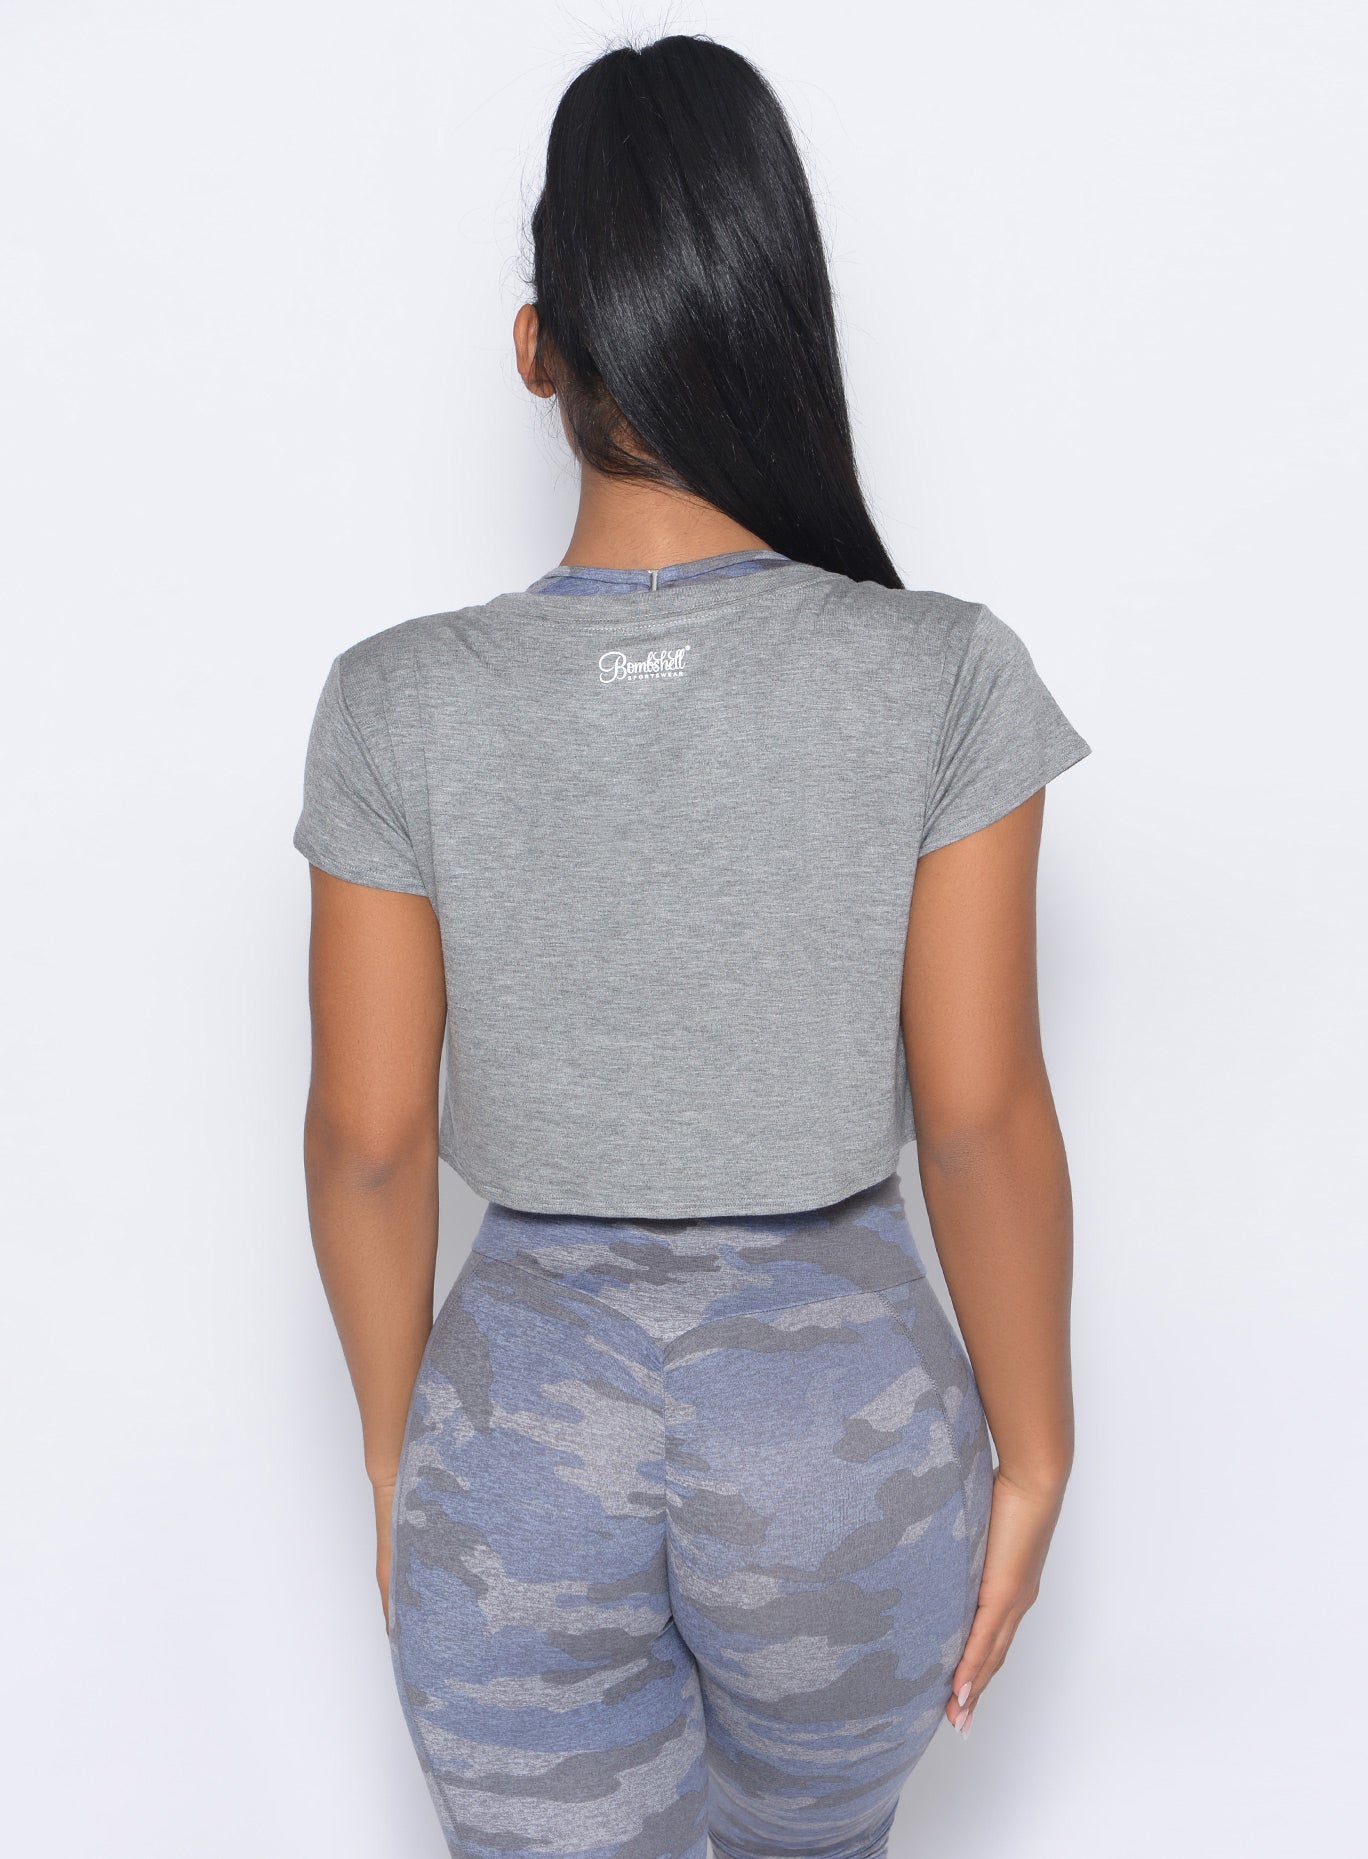 Back view of the model in our freedom tee in silver color and a matching leggings